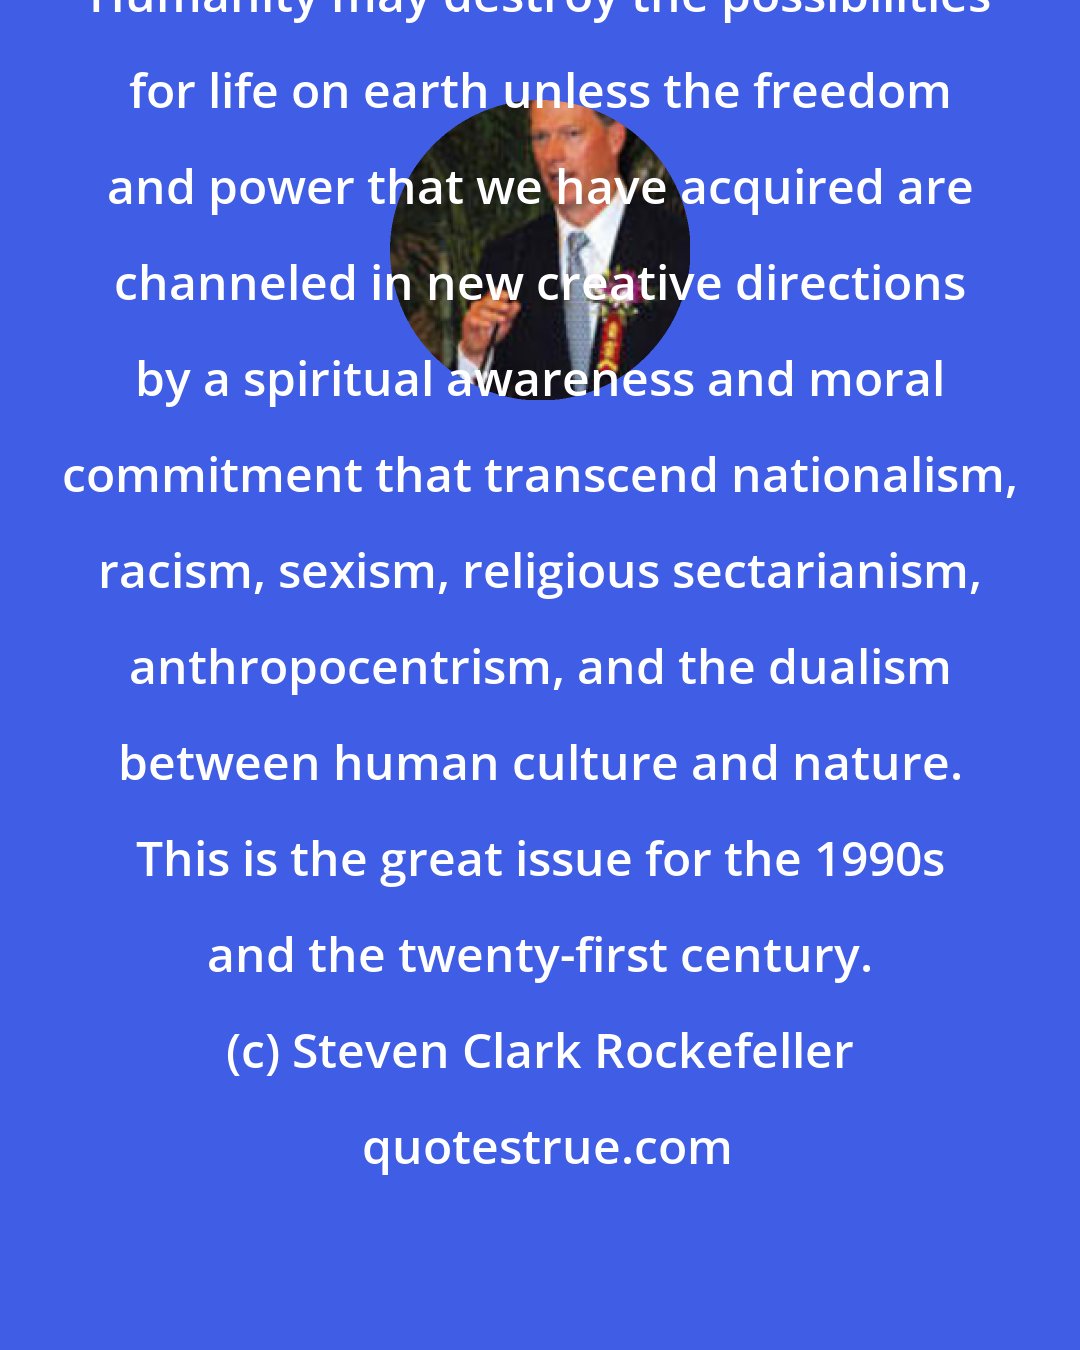 Steven Clark Rockefeller: Humanity may destroy the possibilities for life on earth unless the freedom and power that we have acquired are channeled in new creative directions by a spiritual awareness and moral commitment that transcend nationalism, racism, sexism, religious sectarianism, anthropocentrism, and the dualism between human culture and nature. This is the great issue for the 1990s and the twenty-first century.